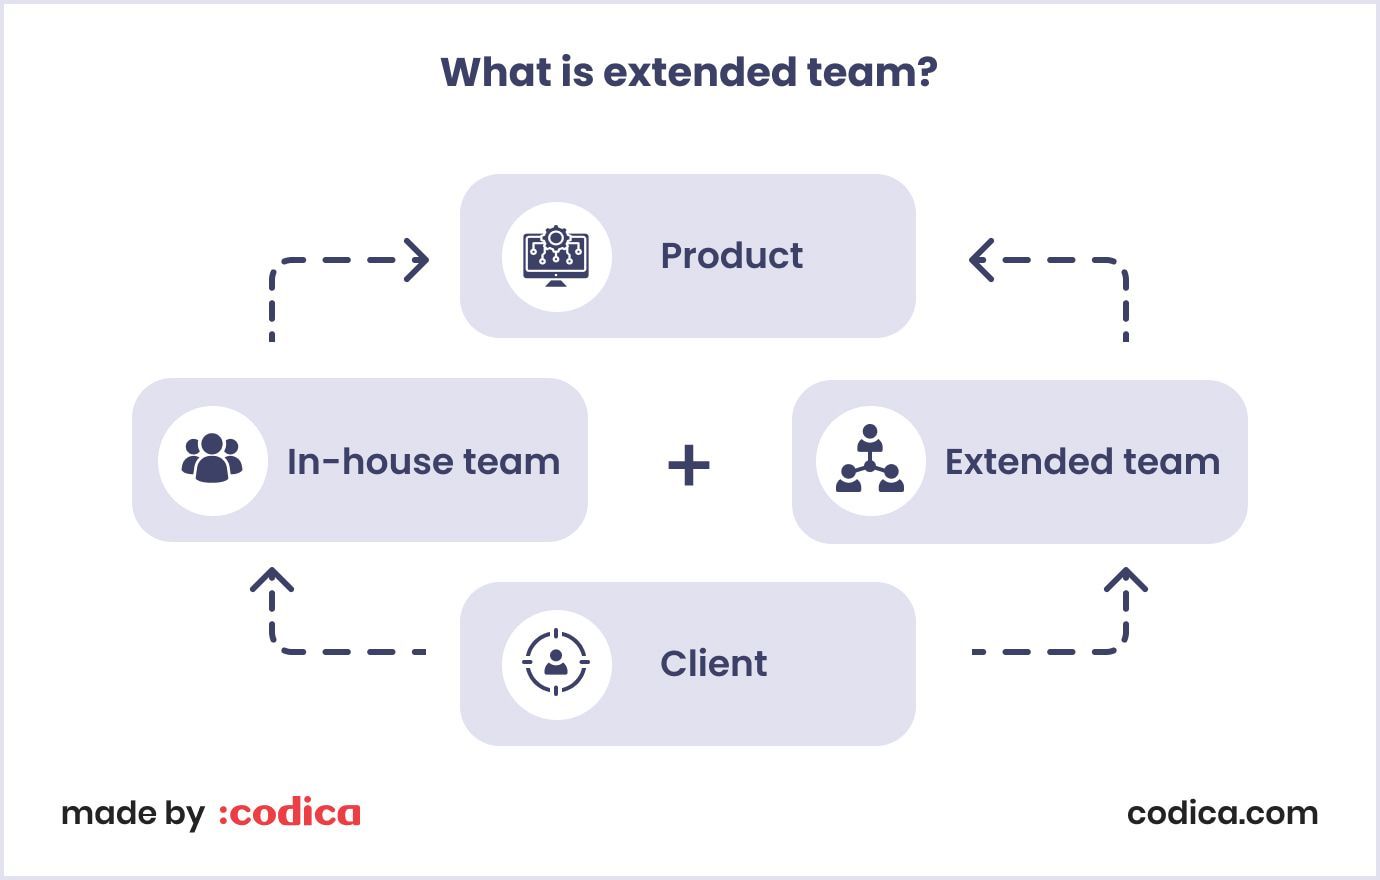 How the extended team model works